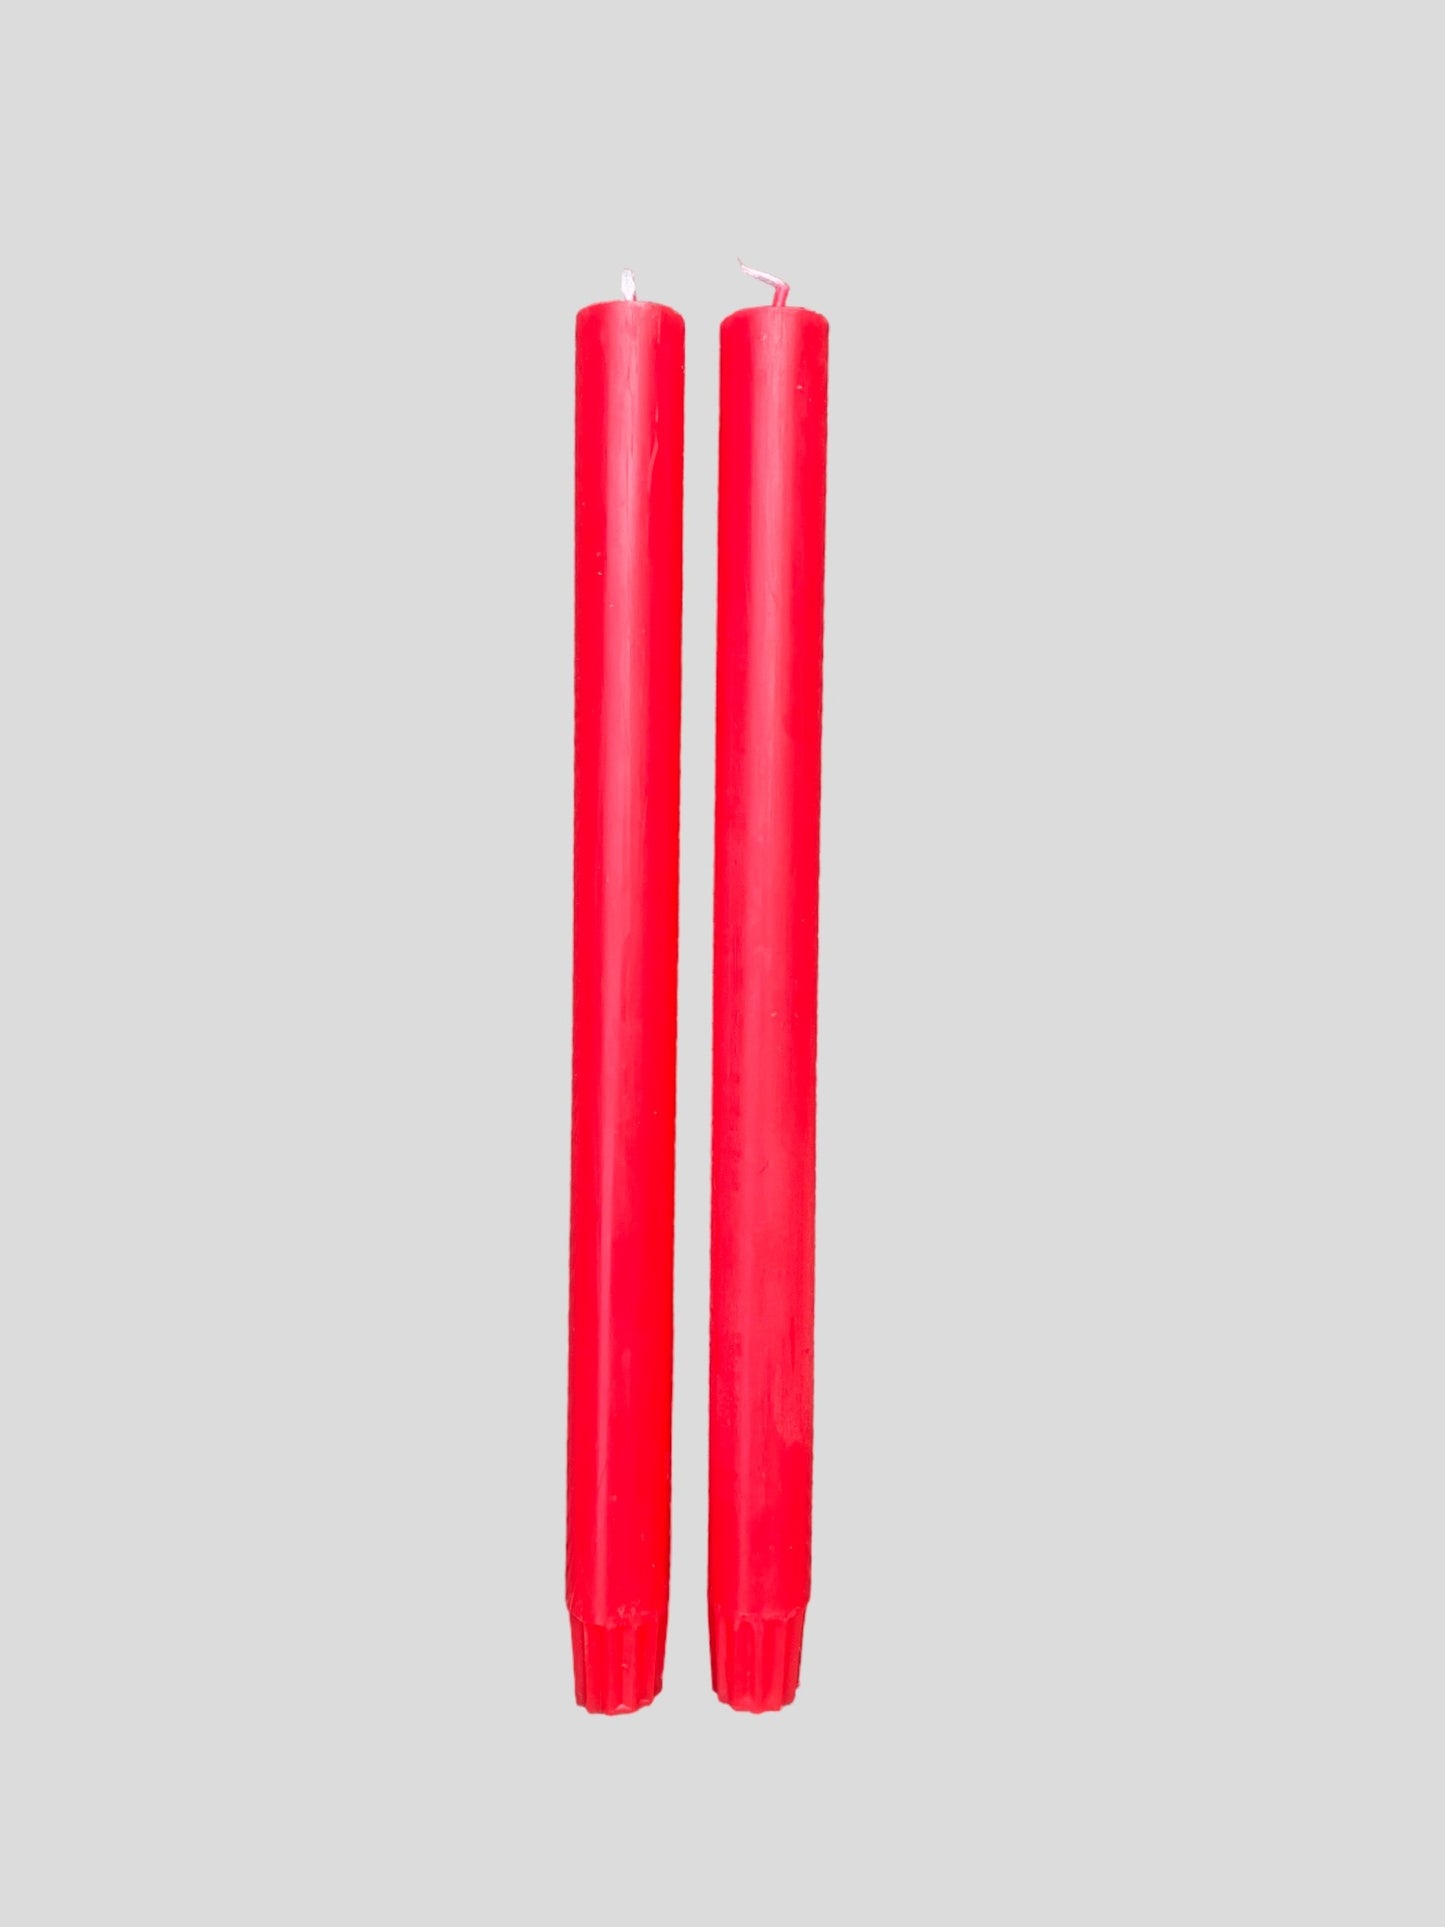 A pair of red candles from True Grace